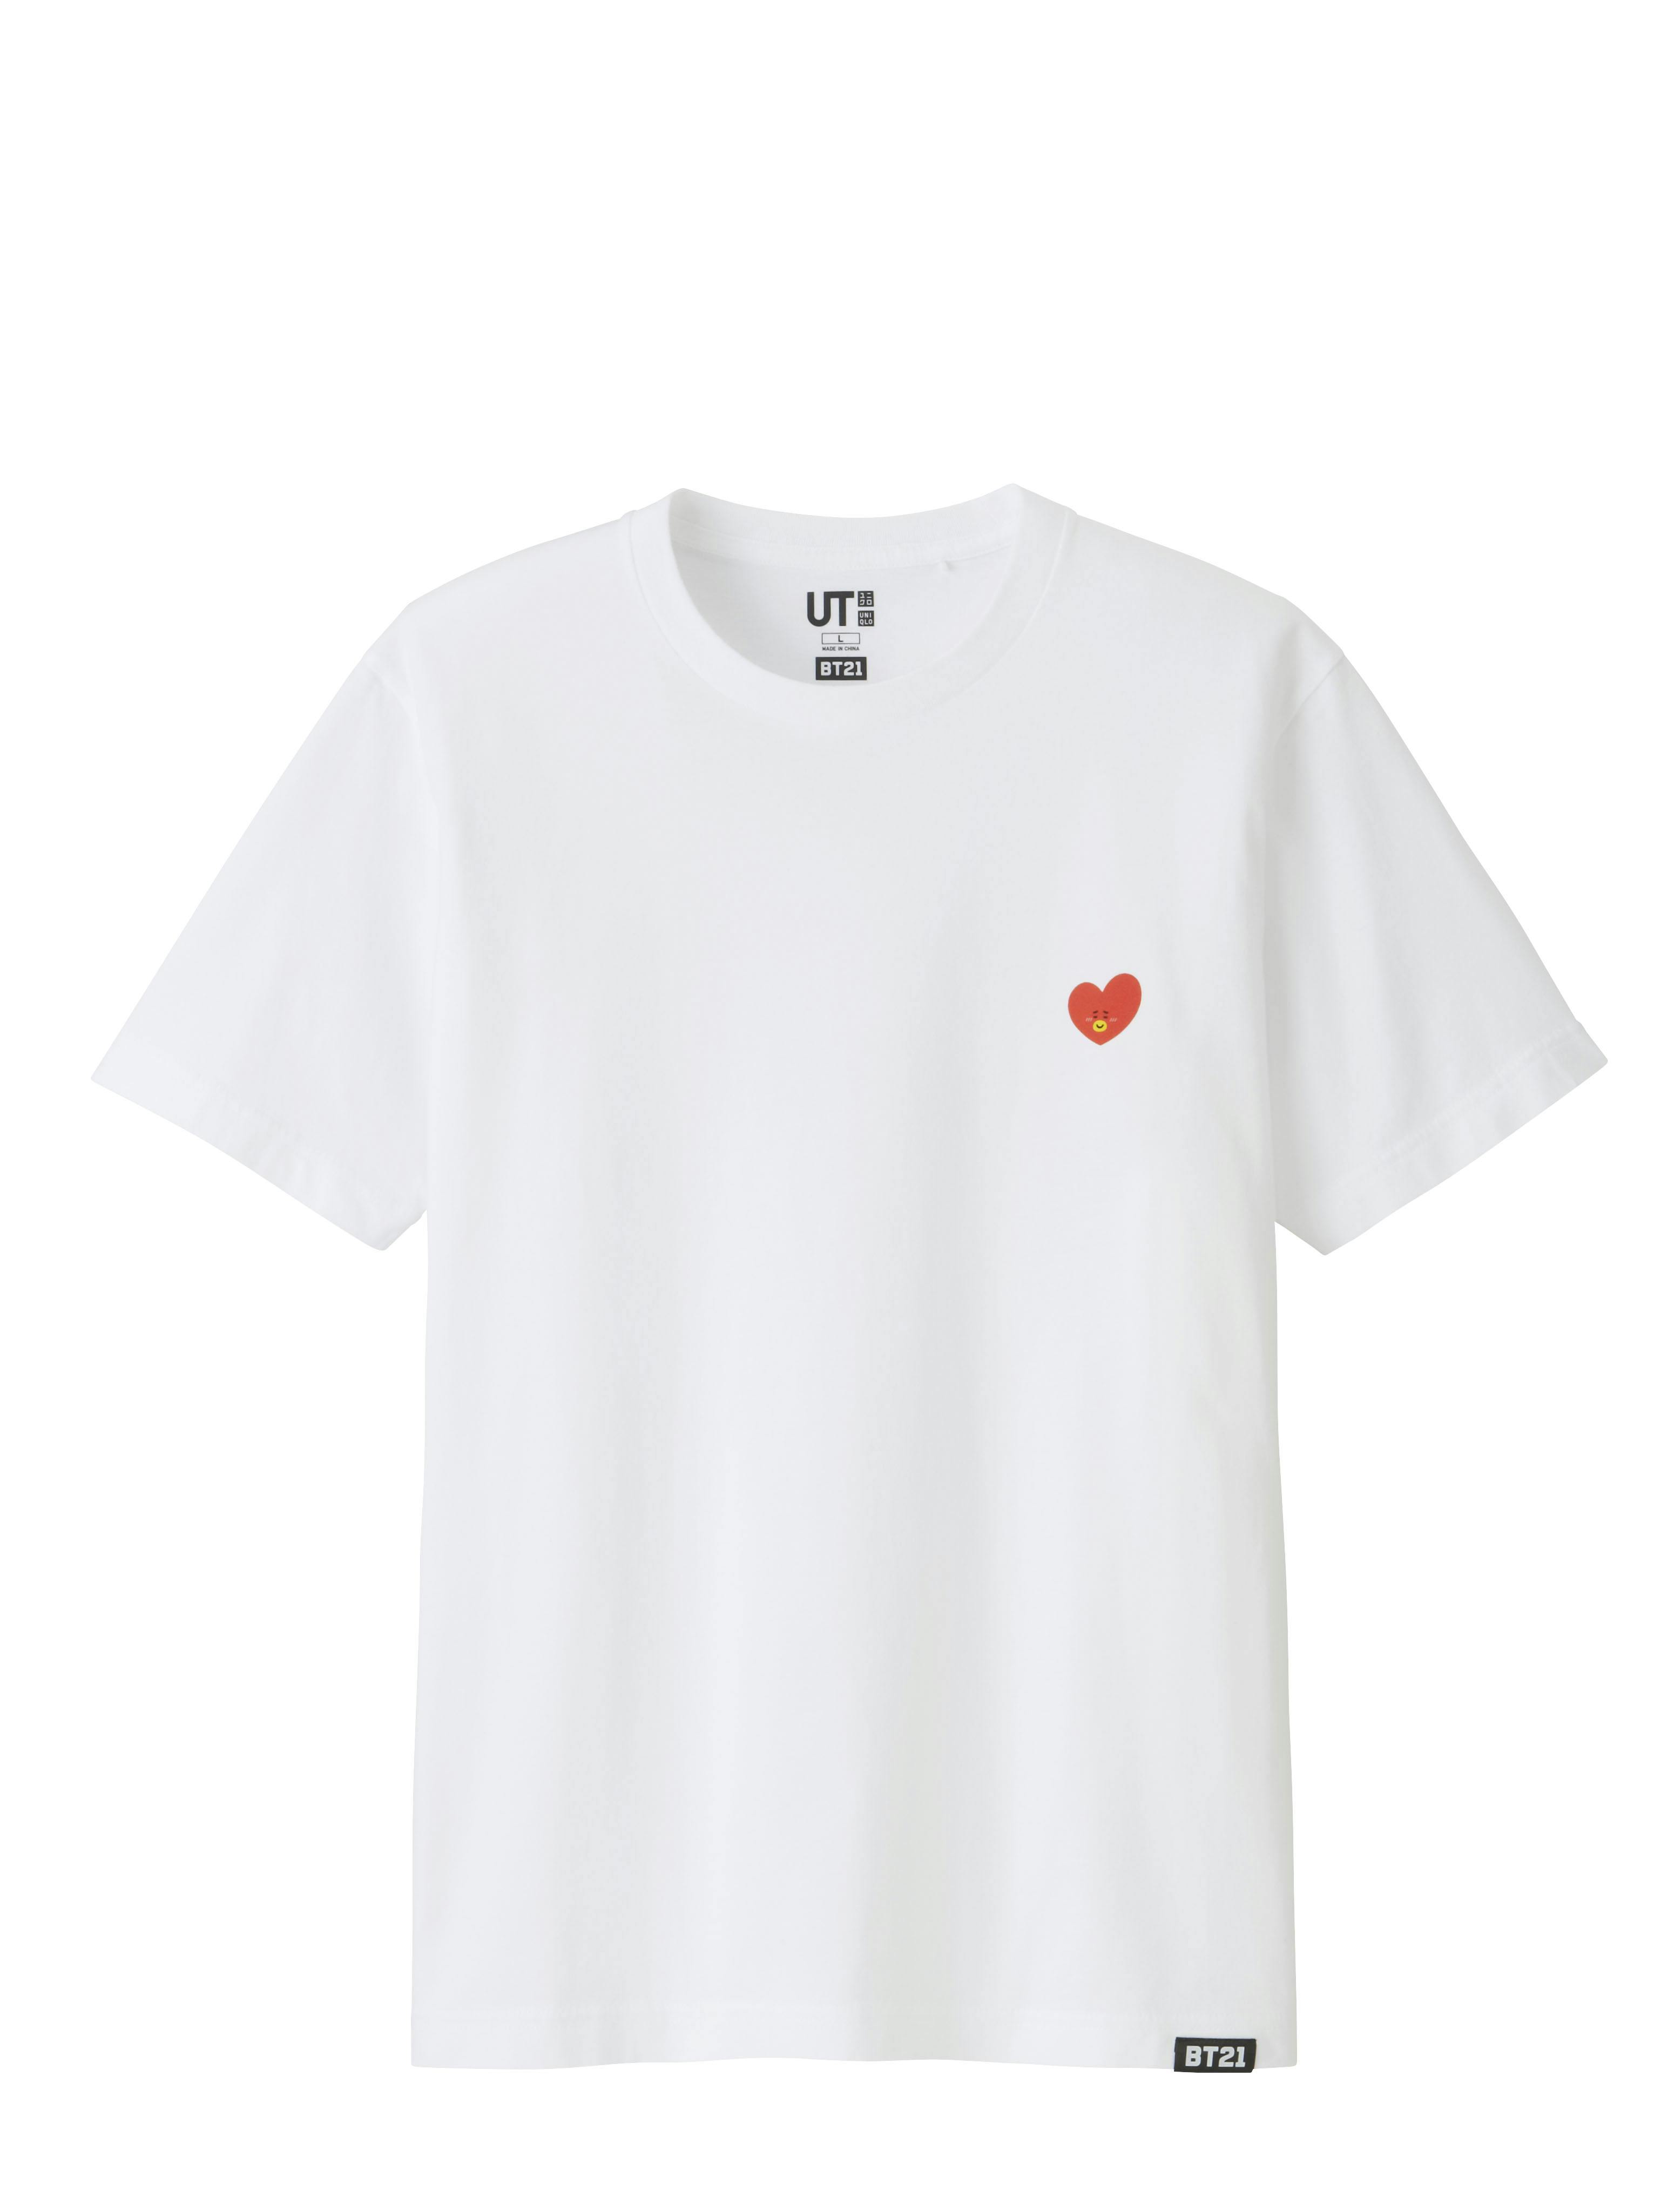 See All The Designs Available For Uniqlo X Bt21